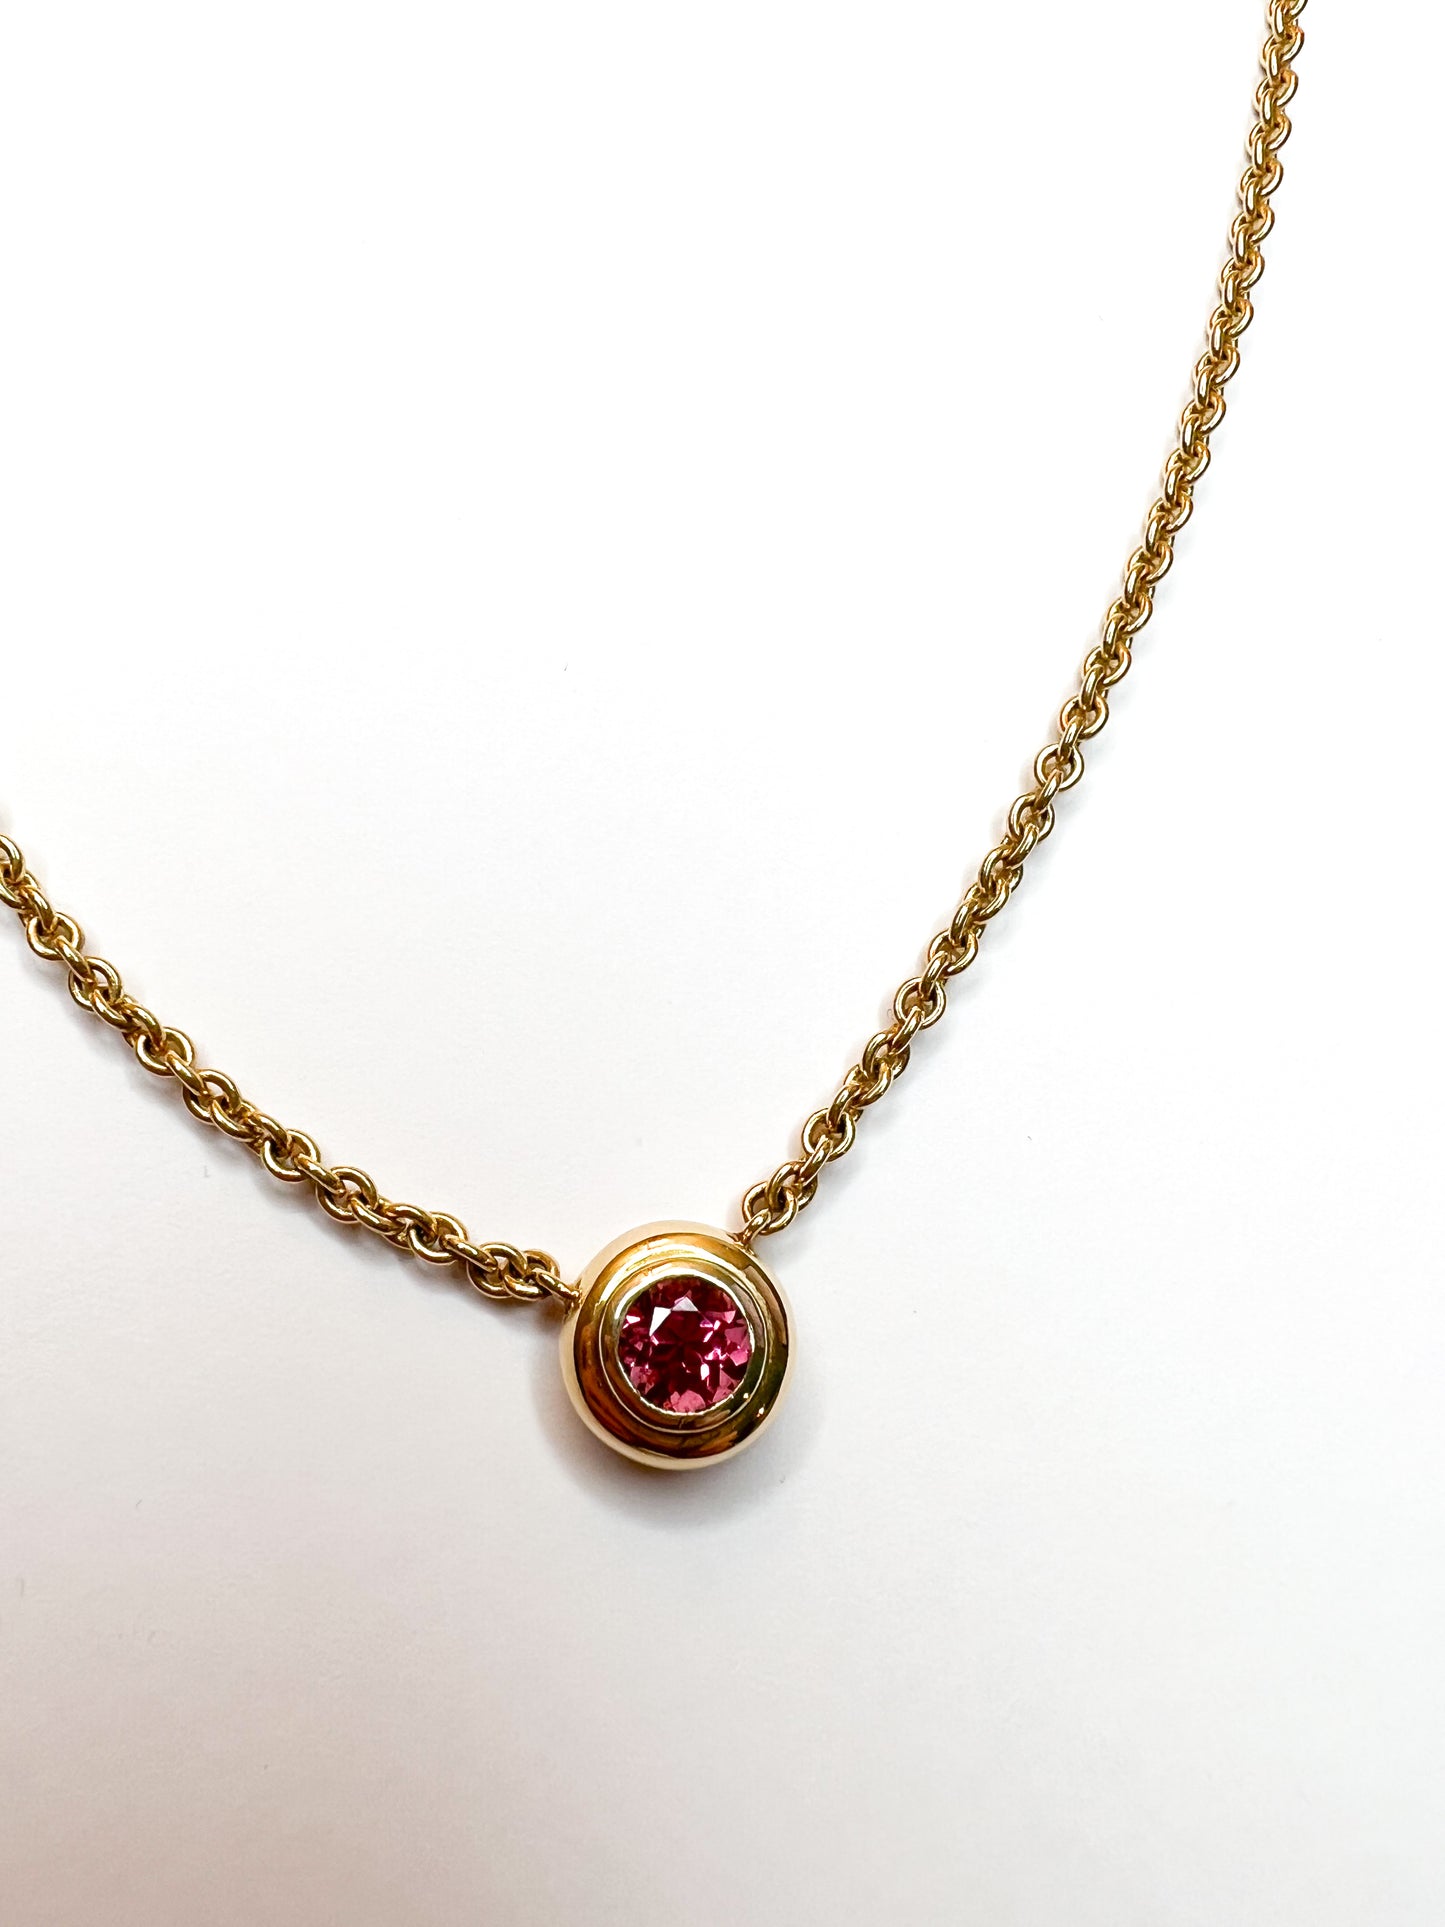 14K Yellow Gold Pink Sapphire Necklace